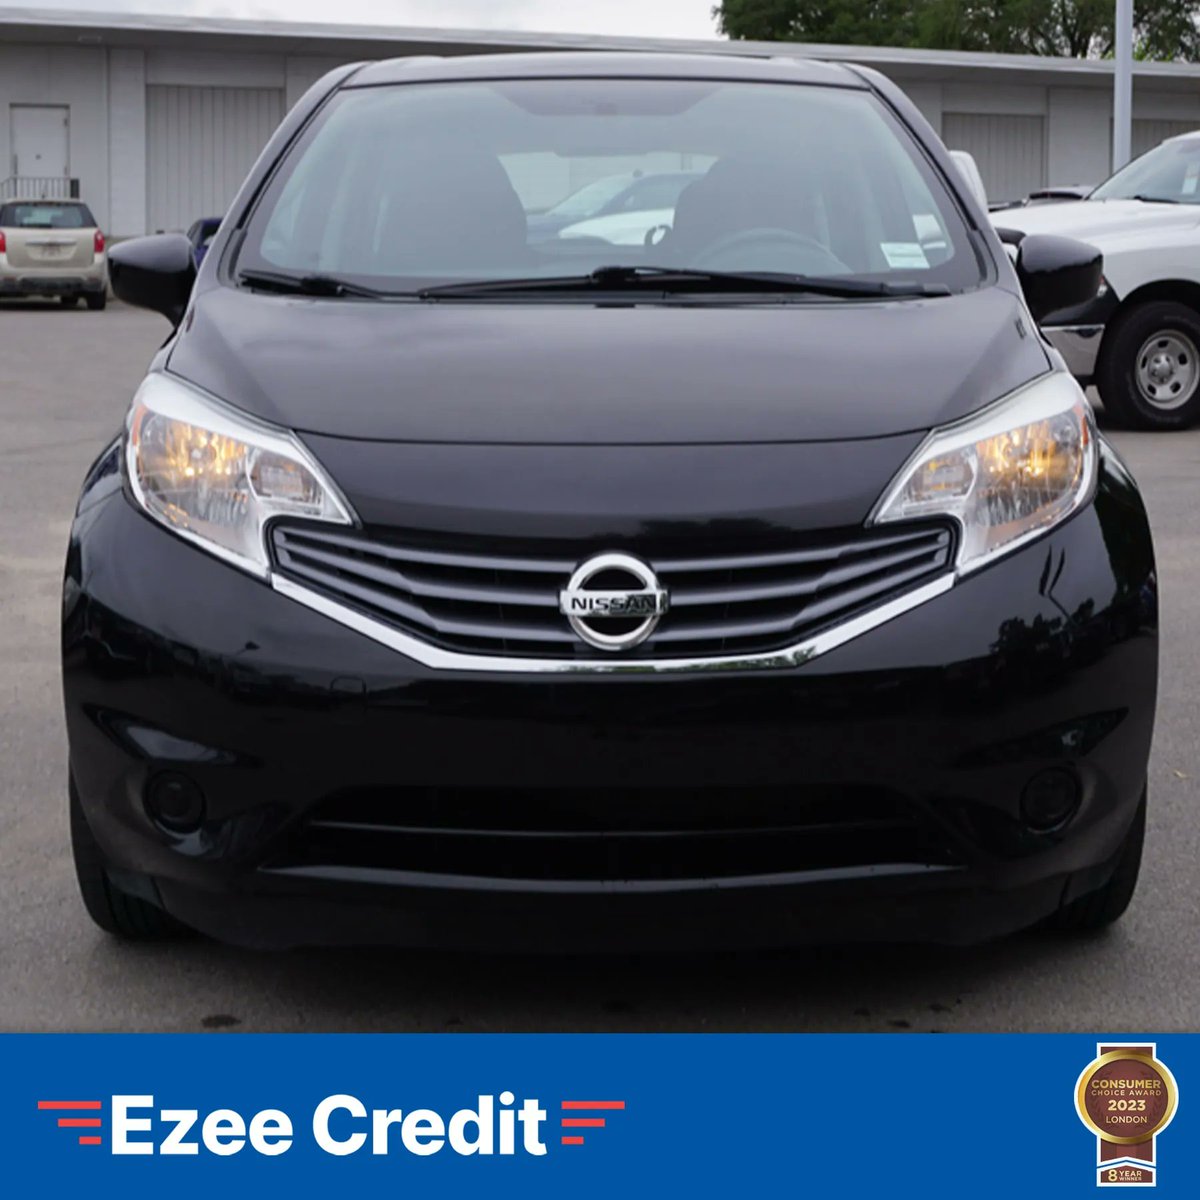 Unleash your drive with the Nissan Versa 2015! From its agile performance to its spacious interior, this compact car is designed to elevate your everyday journeys. Don't let bad credit stop you from owning a reliable and affordable ride. #NissanVersa #ReliableRide'